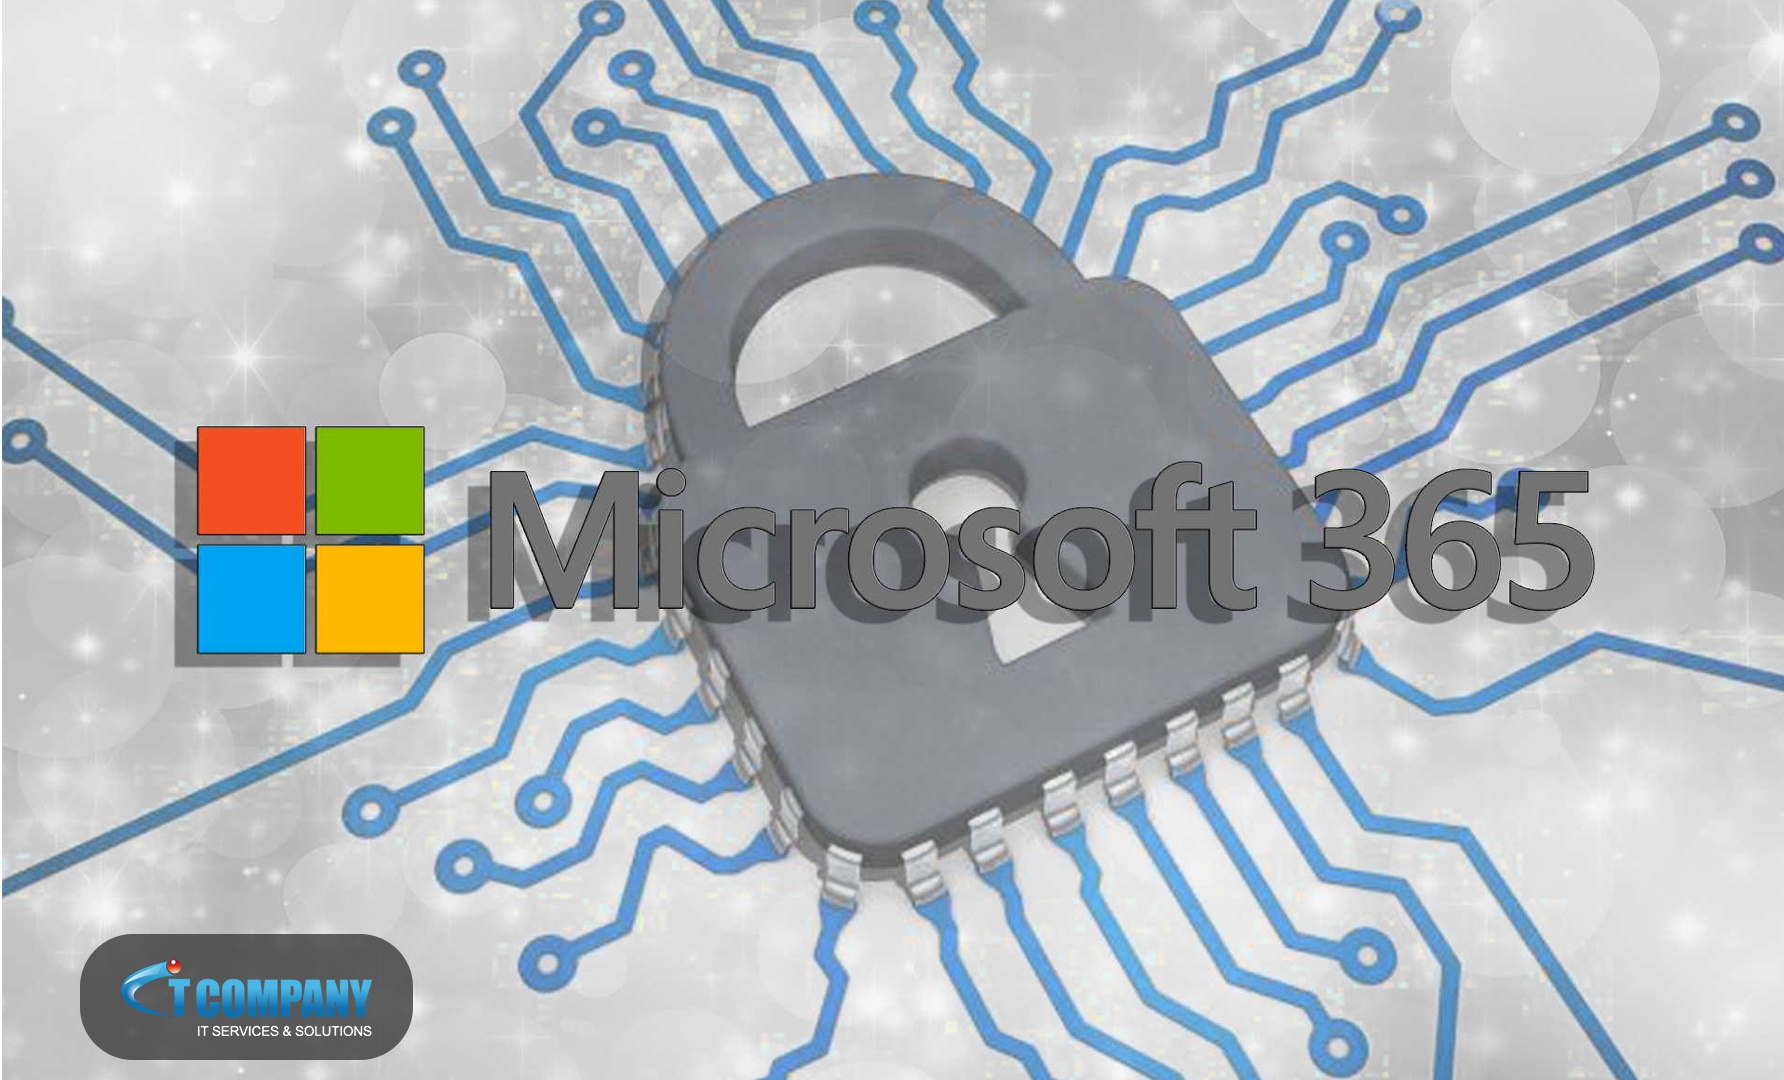 The new Microsoft 365 service provides a better method to safeguard all of your devices